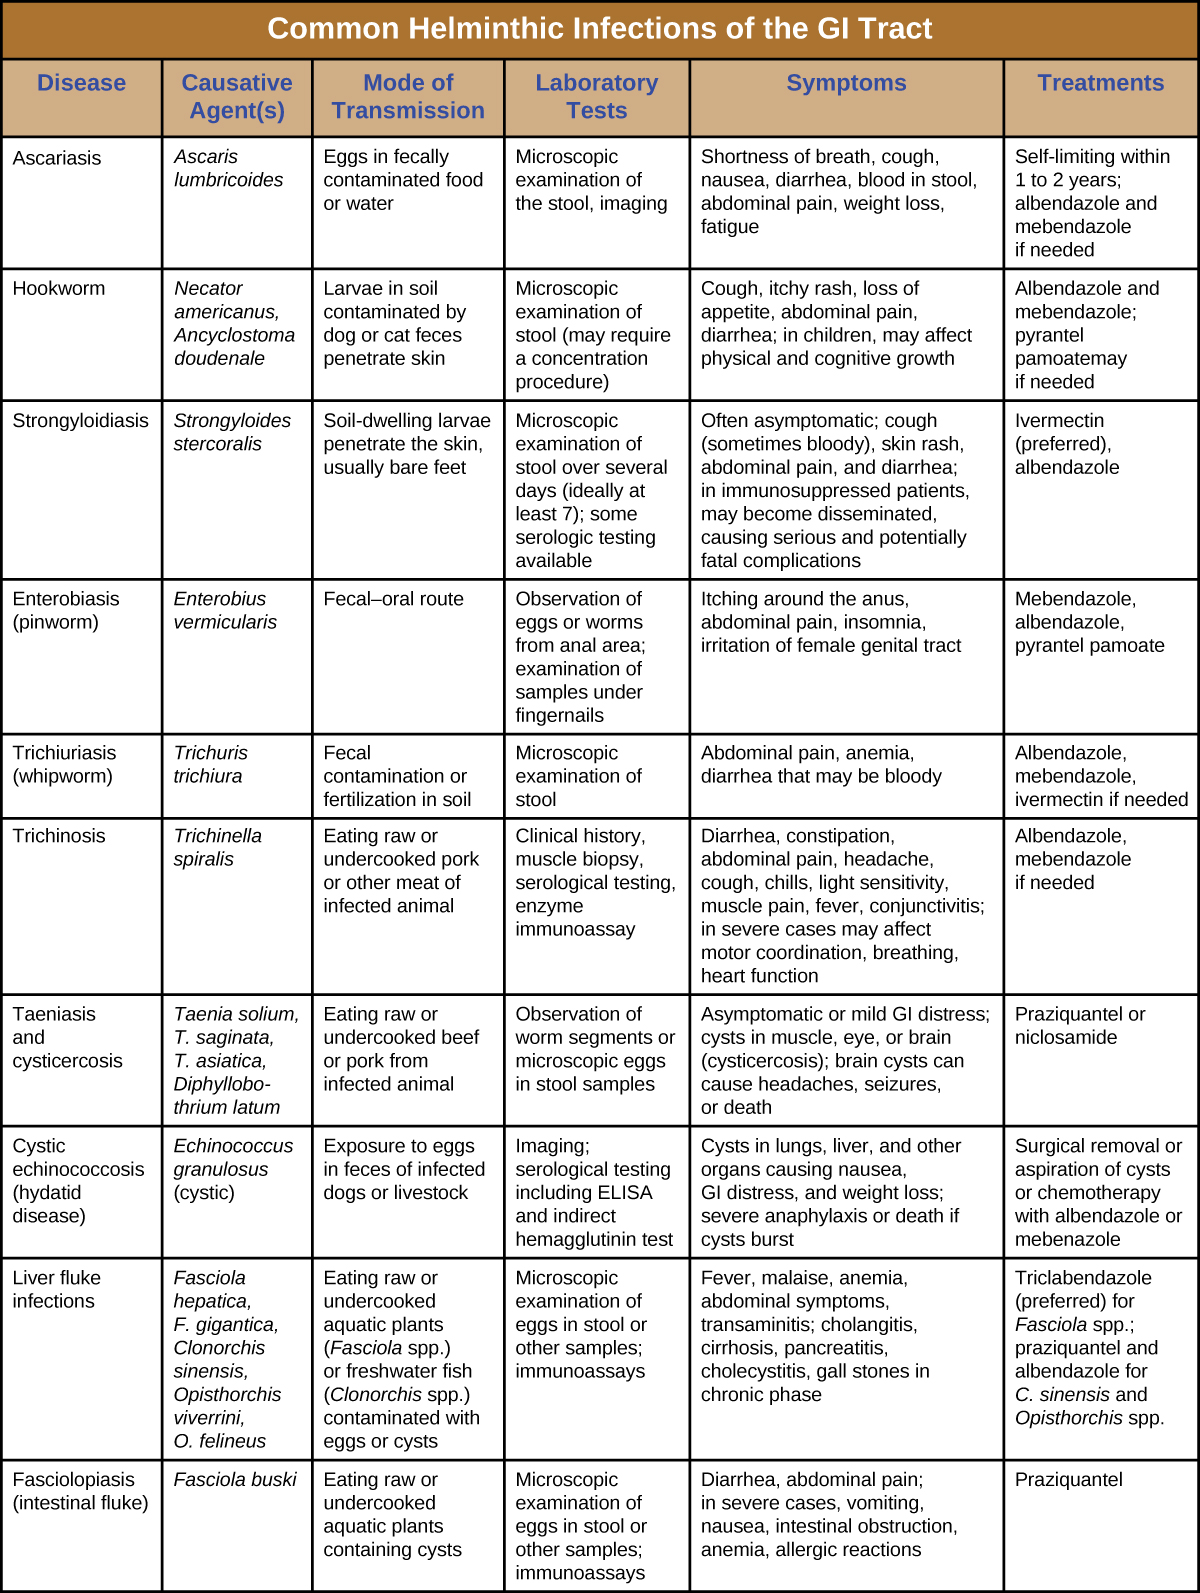 Table titled: Helminthic Infections of the GI Tract. Columns: Disease, Pathogen, Signs and Symptoms, Transmission, Diagnostic Tests, Antimicrobial Drugs. Ascariasis; Ascaris lumbricoides; Shortness of breath, cough, nausea, diarrhea, bloody stool, abdominal pain, weight loss, fatigue, worms in stool or sputum; Ingestion of eggs in fecally contaminated food and water; Microscopic observation of eggs in stool sample, X-rays, ultrasounds or MRIs; Albendazole, mebendazole. Hookworm; Necator americanus, Ancyclostoma doudenale; Cough, itchy rash, wheezing, loss of appetite, abdominal pain, diarrhea, cutaneous larva migrans; Larvae in soil contaminated by dog or cat feces penetrate the skin; Microscopic observation of eggs in stool sample; Albendazole, mebendazole, pyrantel pamoate, thiabendazole. Hydatid disease (cystic echinococcosis); Echinococcus granulosus ; Cysts in lungs, liver, and other organs causing nausea, GI distress, and weight loss; severe anaphylaxis or death if cysts burst; Exposure to eggs in feces of infected dogs or livestock; CT, MRI, or ultrasonography to detect cysts; ELISA, indirect hemagglutinin test; Albendazole or mebenazole. Intestinal flukes (fasciolopsiasis); Fasciolopsis buski; Diarrhea, abdominal pain; in severe cases, vomiting, nausea, intestinal obstruction, anemia, allergic reactions; Ingestion of raw or undercooked aquatic plants containing cysts; Microscopic examination of eggs in stool or other samples; immunoassays; Praziquantel. Liver flukes; Fasciola hepatica, F. gigantica, Clonorchis sinensis, Opisthorchis viverrini, O. felineus; Fever, malaise, anemia, abdominal signs and symptoms, transaminitis; cholangitis, cirrhosis, pancreatitis, cholecystitis, gall stones in chronic phase; Ingestion of raw or undercooked aquatic plants (Fasciola spp.) or freshwater fish (Clonorchis spp.) contaminated with eggs or cysts; Microscopic observation of eggs in stool or other samples; immunoassays; Triclabendazole for Fasciola; praziquantel, albendazole for Clonorchis and Opisthorchis. Pinworms (Enterobiasis); Enterobius vermicularis; Itching around the anus, abdominal pain, insomnia, irritation of female genital tract Fecal-oral route; Visual observation of worms in anal region; microscopic observation of eggs from anal area or under fingernails; Mebendazole, albendazole, pyrantel pamoate. Strongyloidiasis; Strongyloides stercoralis; Often asymptomatic; cough (sometimes bloody), skin rash, abdominal pain, diarrhea; in immunosuppressed patients, may become disseminated, causing serious and potentially fatal complications Soil-dwelling larvae penetrate the skin, usually bare feet; Microscopic observation of larvae in stool; serological testing for antigens; Ivermectin, albendazole. Tapeworms (taeniasis) ; Taenia solium, T. saginata, T. asiatica, Diphyllobothrium latum; Asymptomatic or mild GI distress; cysts in muscle, eye, or brain (cysticercosis); brain cysts can cause headaches, seizures, or death; Ingestion of raw or undercooked pork or beef from infected animal; Observation of worm segments or microscopic eggs in stool; CT or MRI to detect cysts; Praziquantel, niclosamide. Trichinosis; Trichinella spiralis, other Trichinella spp. Diarrhea, constipation, abdominal pain, headache, cough, chills, light sensitivity, muscle pain, fever, conjunctivitis; in severe cases may affect motor coordination, breathing, heart function; Ingestion of raw or undercooked pork or other meat of infected animal; Observation of cysts in muscle biopsy, enzyme immunoassay; Albendazole, mebendazole. Whipworm (trichuriasis); Trichuris trichiura; Abdominal pain, anemia, diarrhea (possibly bloody), rectal prolapse; Ingestion of eggs in fecally contaminated food Microscopic observation of eggs in stool; Albendazole, mebendazole, ivermectin.